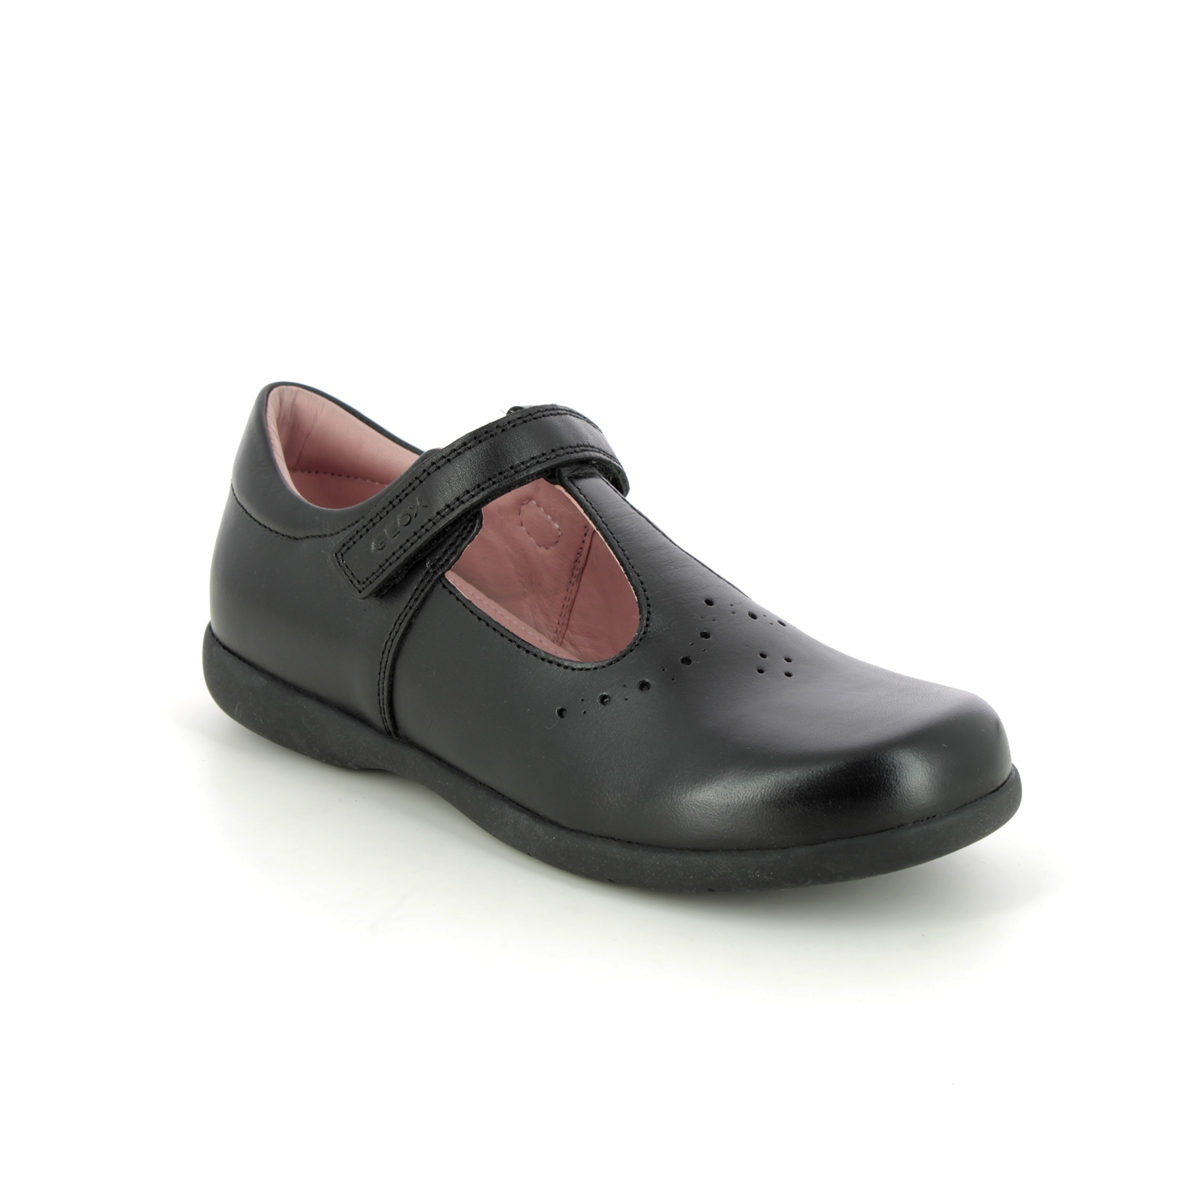 Geox - Naimara B T Bar (Black Leather) J16Fhb-C9999 In Size 31 In Plain Black Leather For School For kids